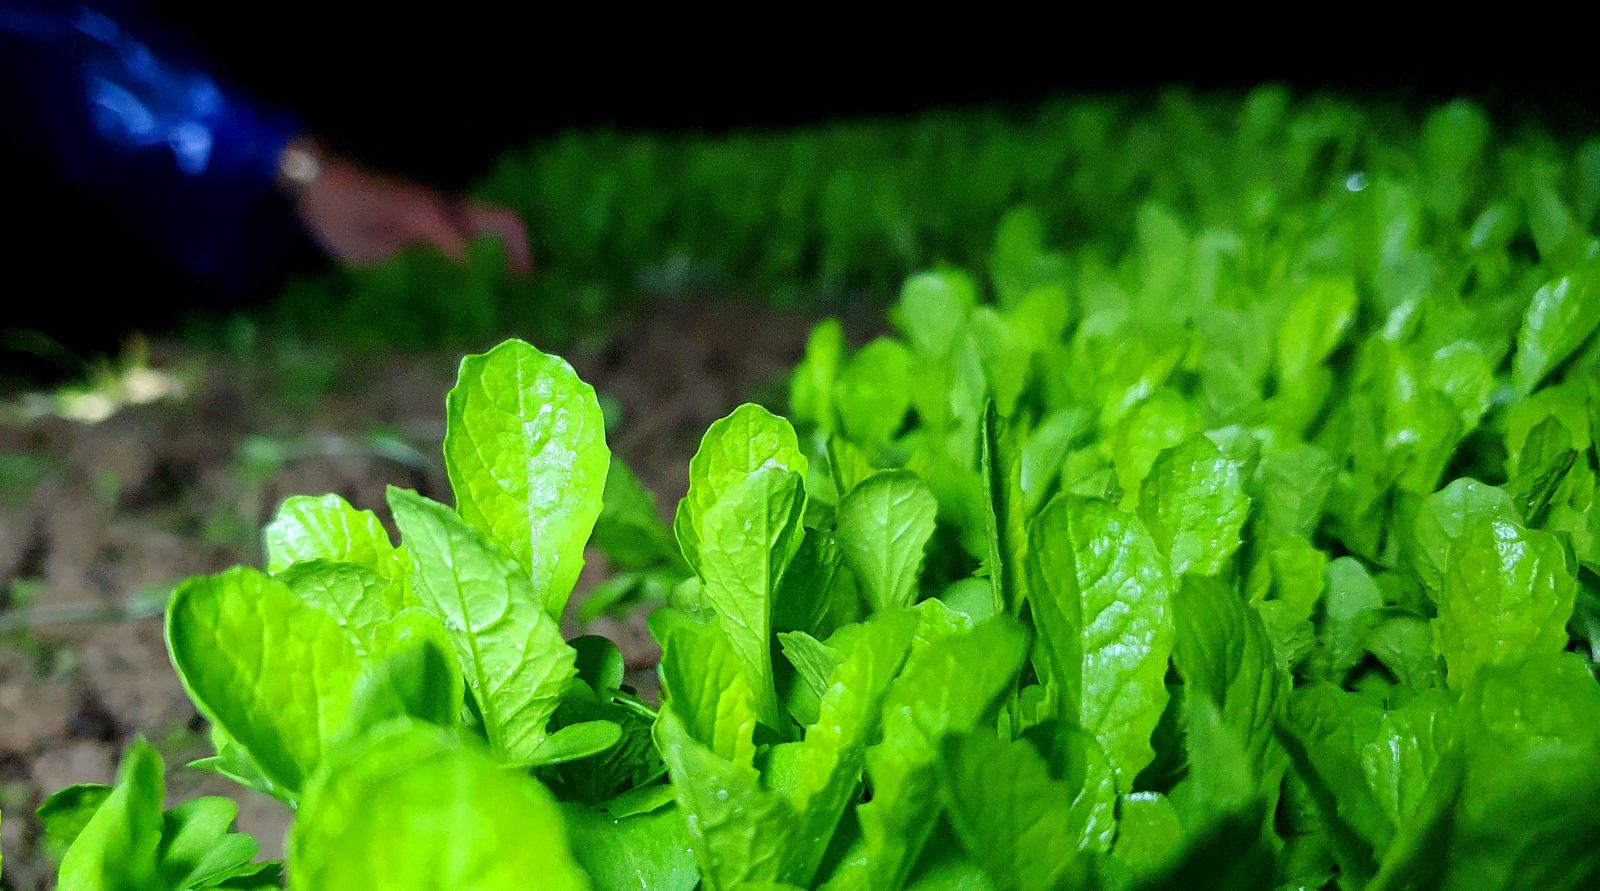 Baby mustard is one of the fastest-harvesting vegetables. It takes around 15 days from the sowing day to the harvest time